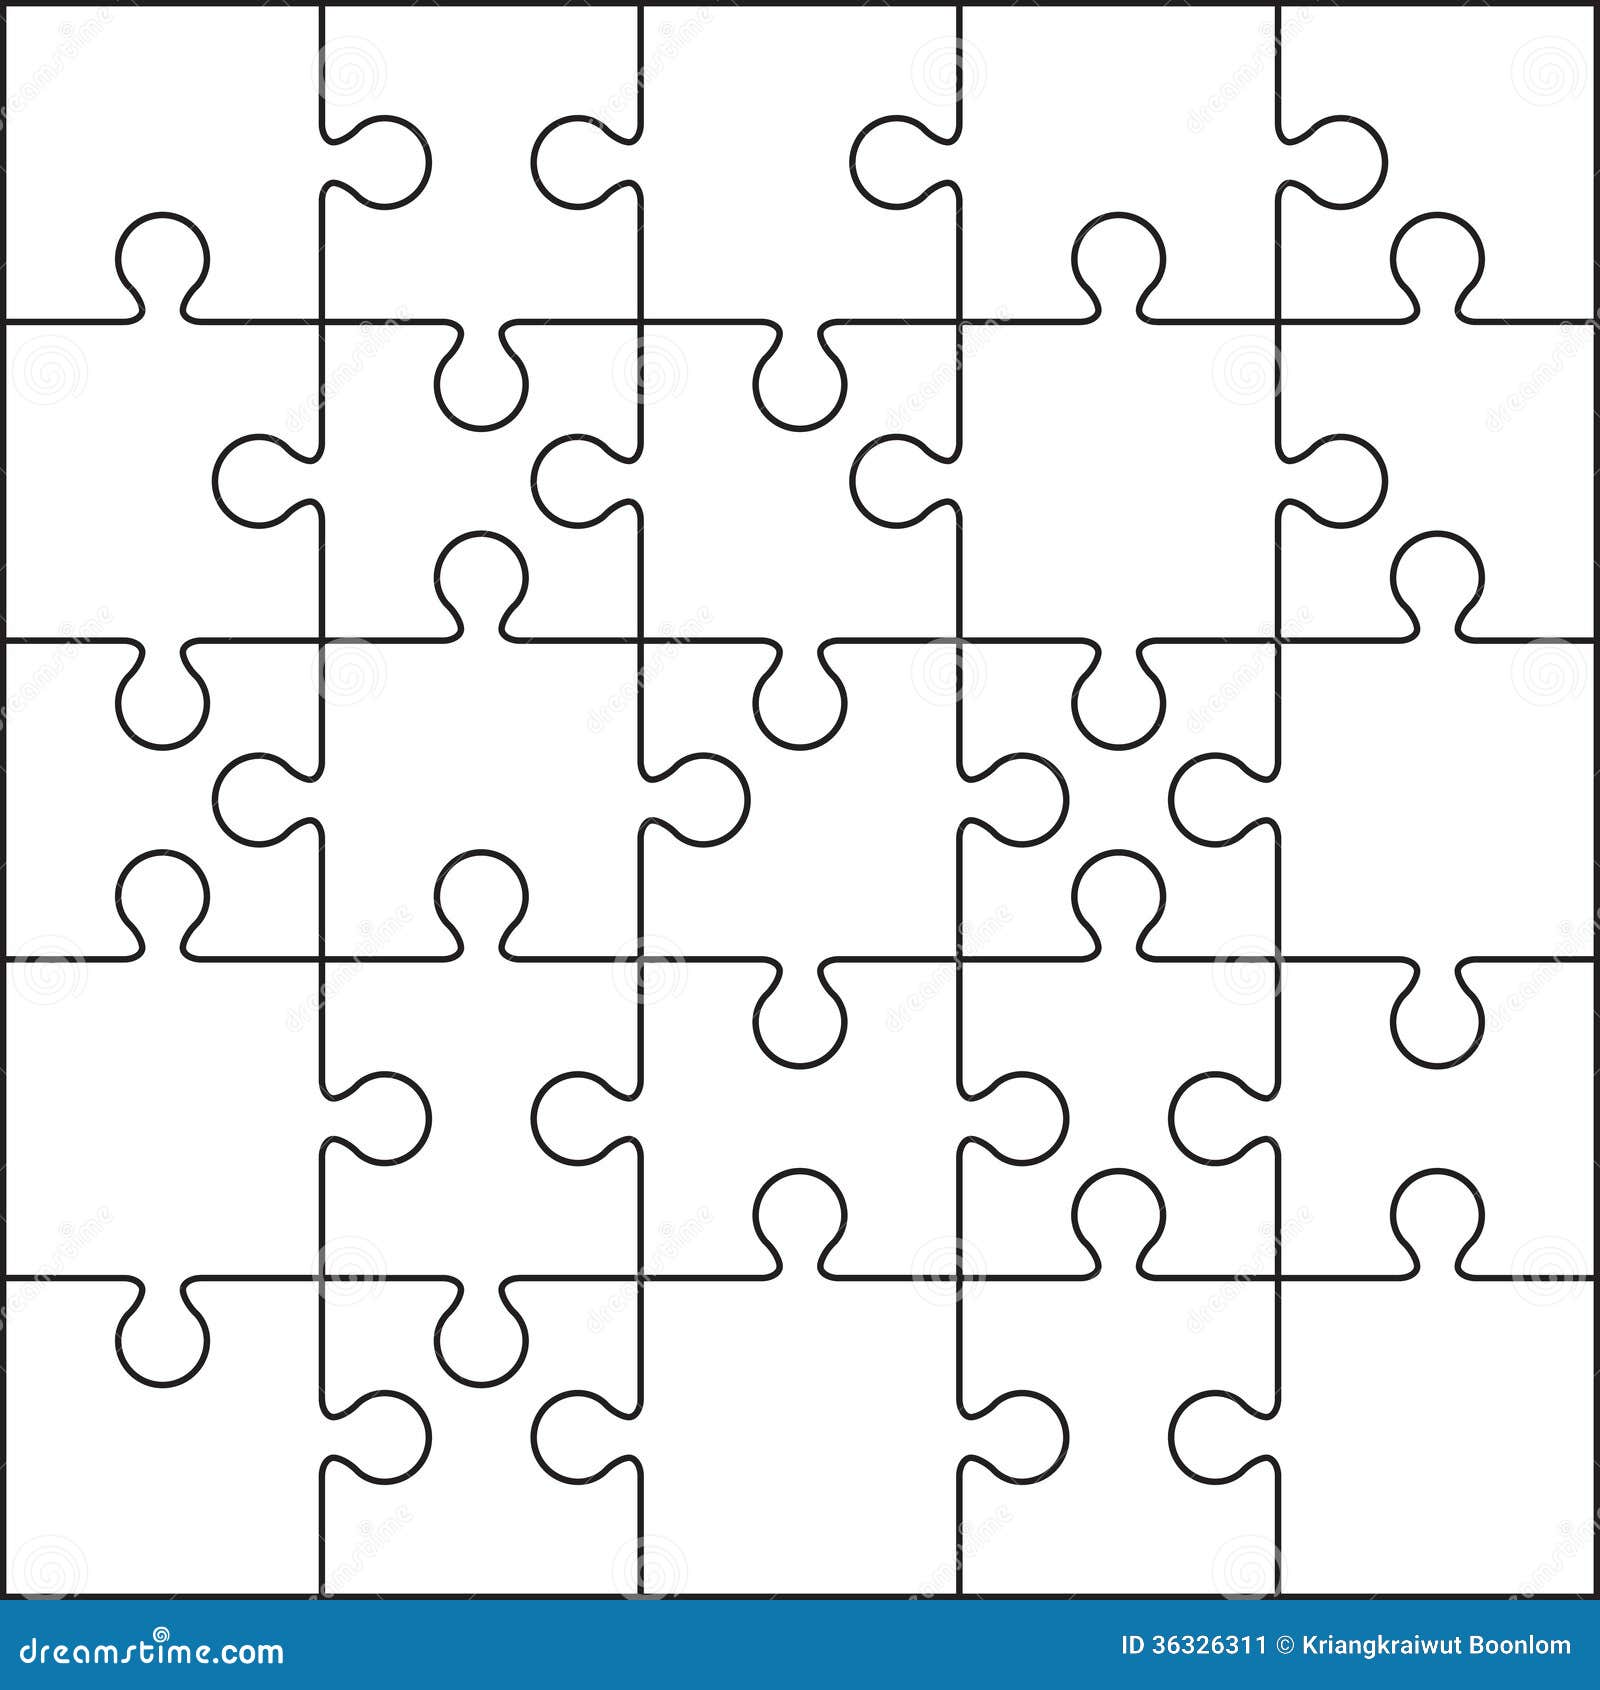 25 Jigsaw puzzle blank template or cutting guidelines.